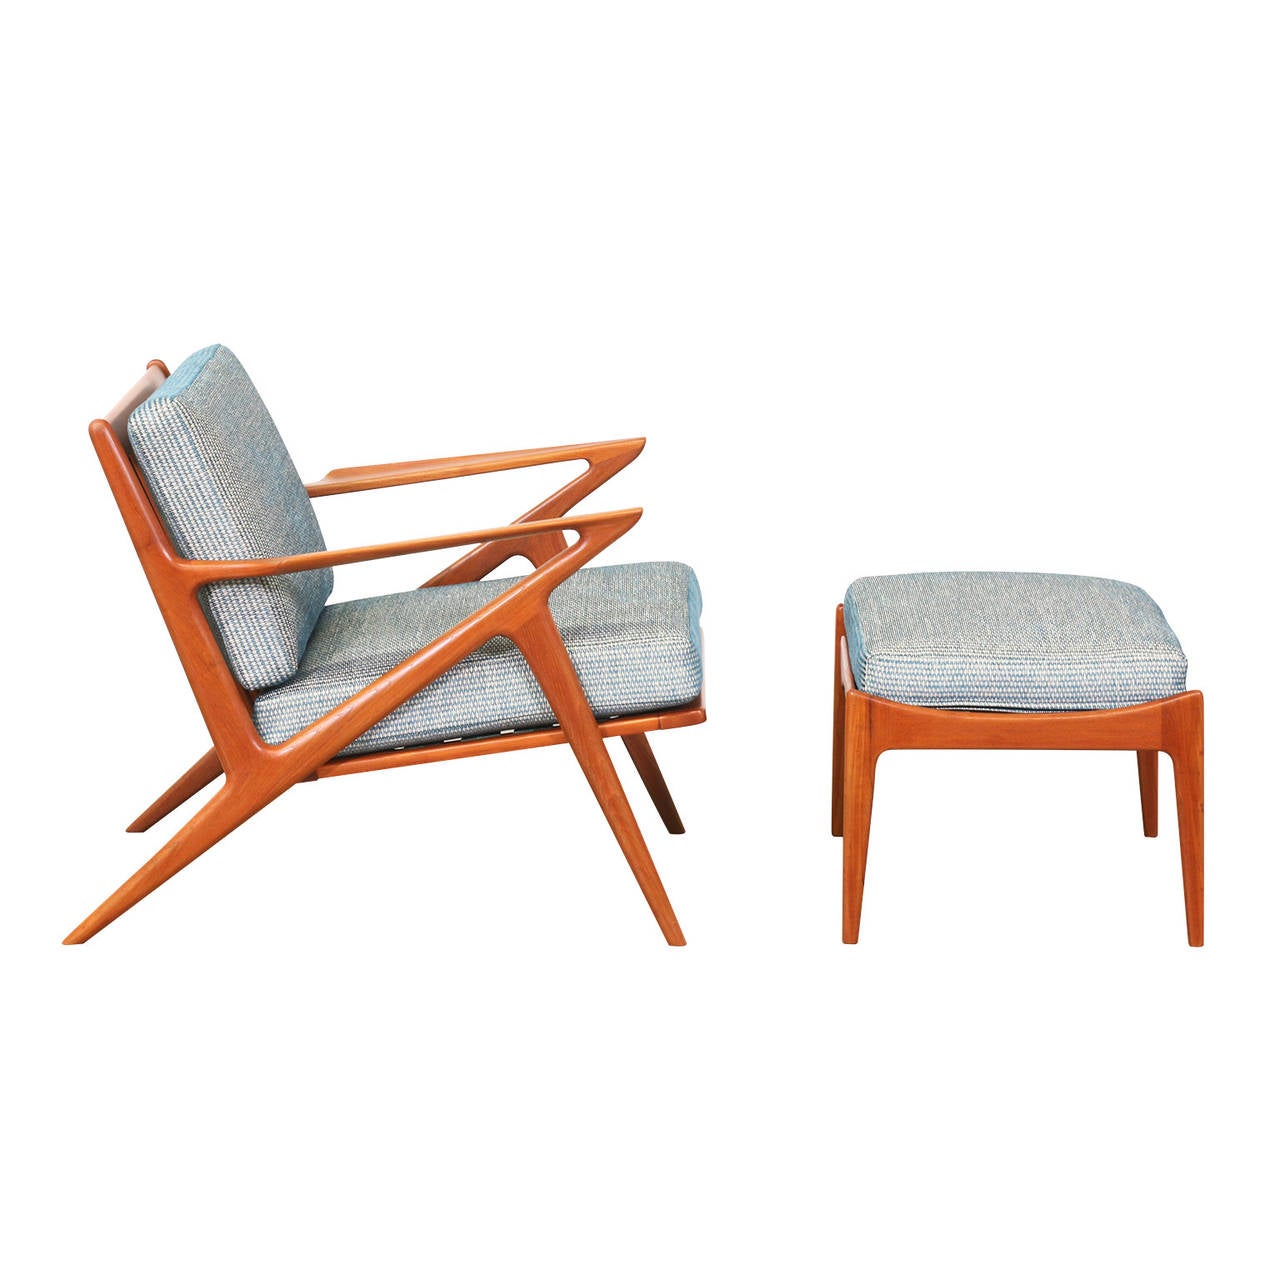 Manufacturer: Selig.
Period/Style: Danish modern.
Country: Denmark.
Date: 1958.